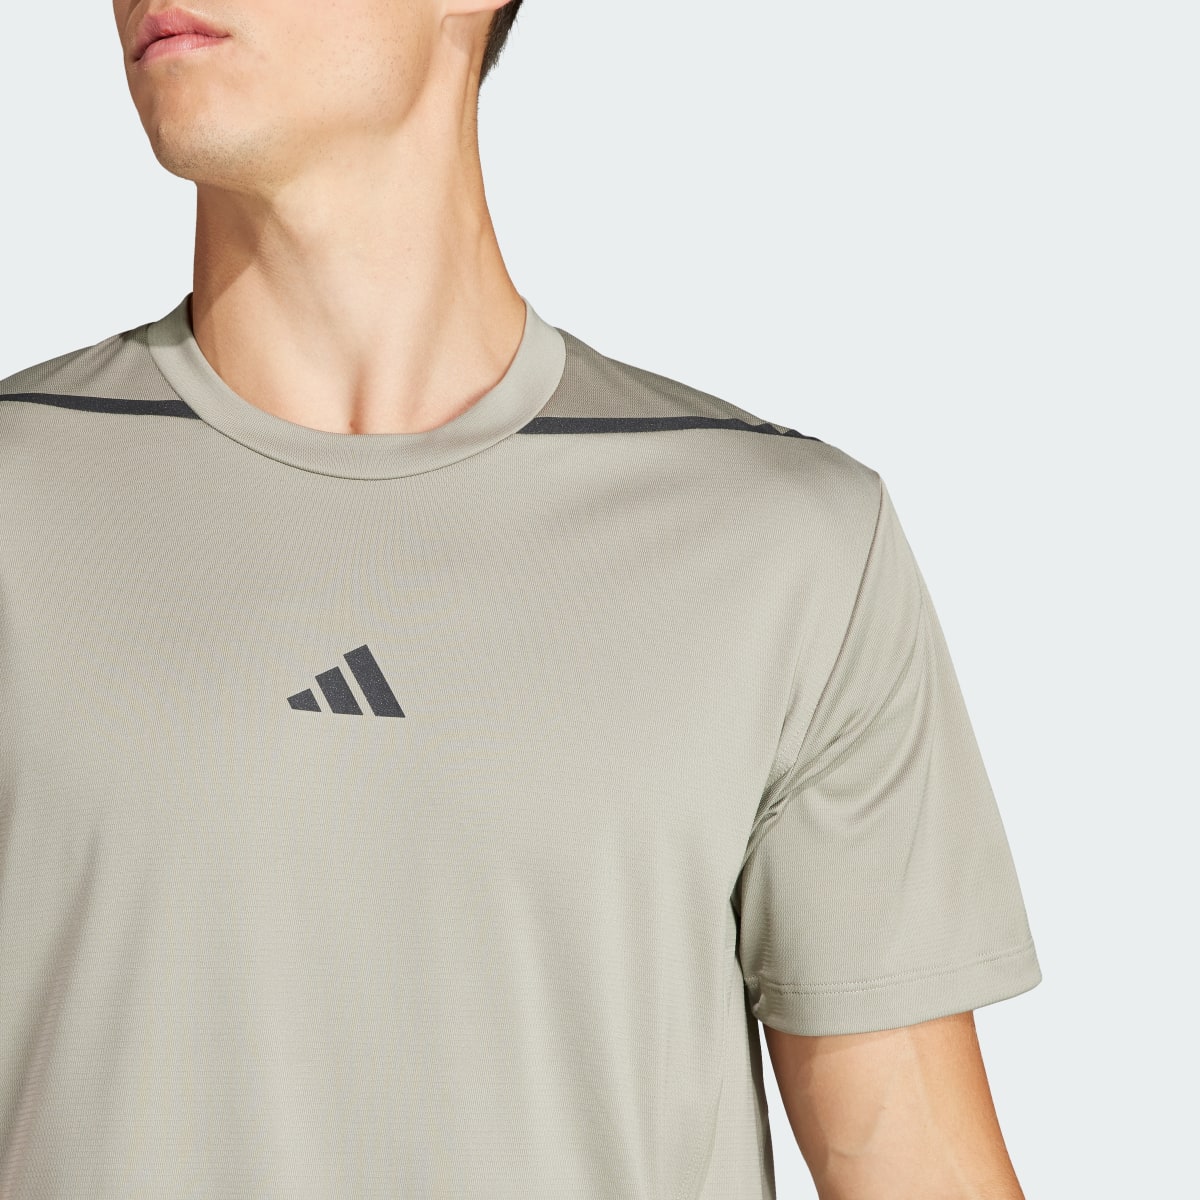 Adidas T-shirt Designed for Training adistrong Workout. 6